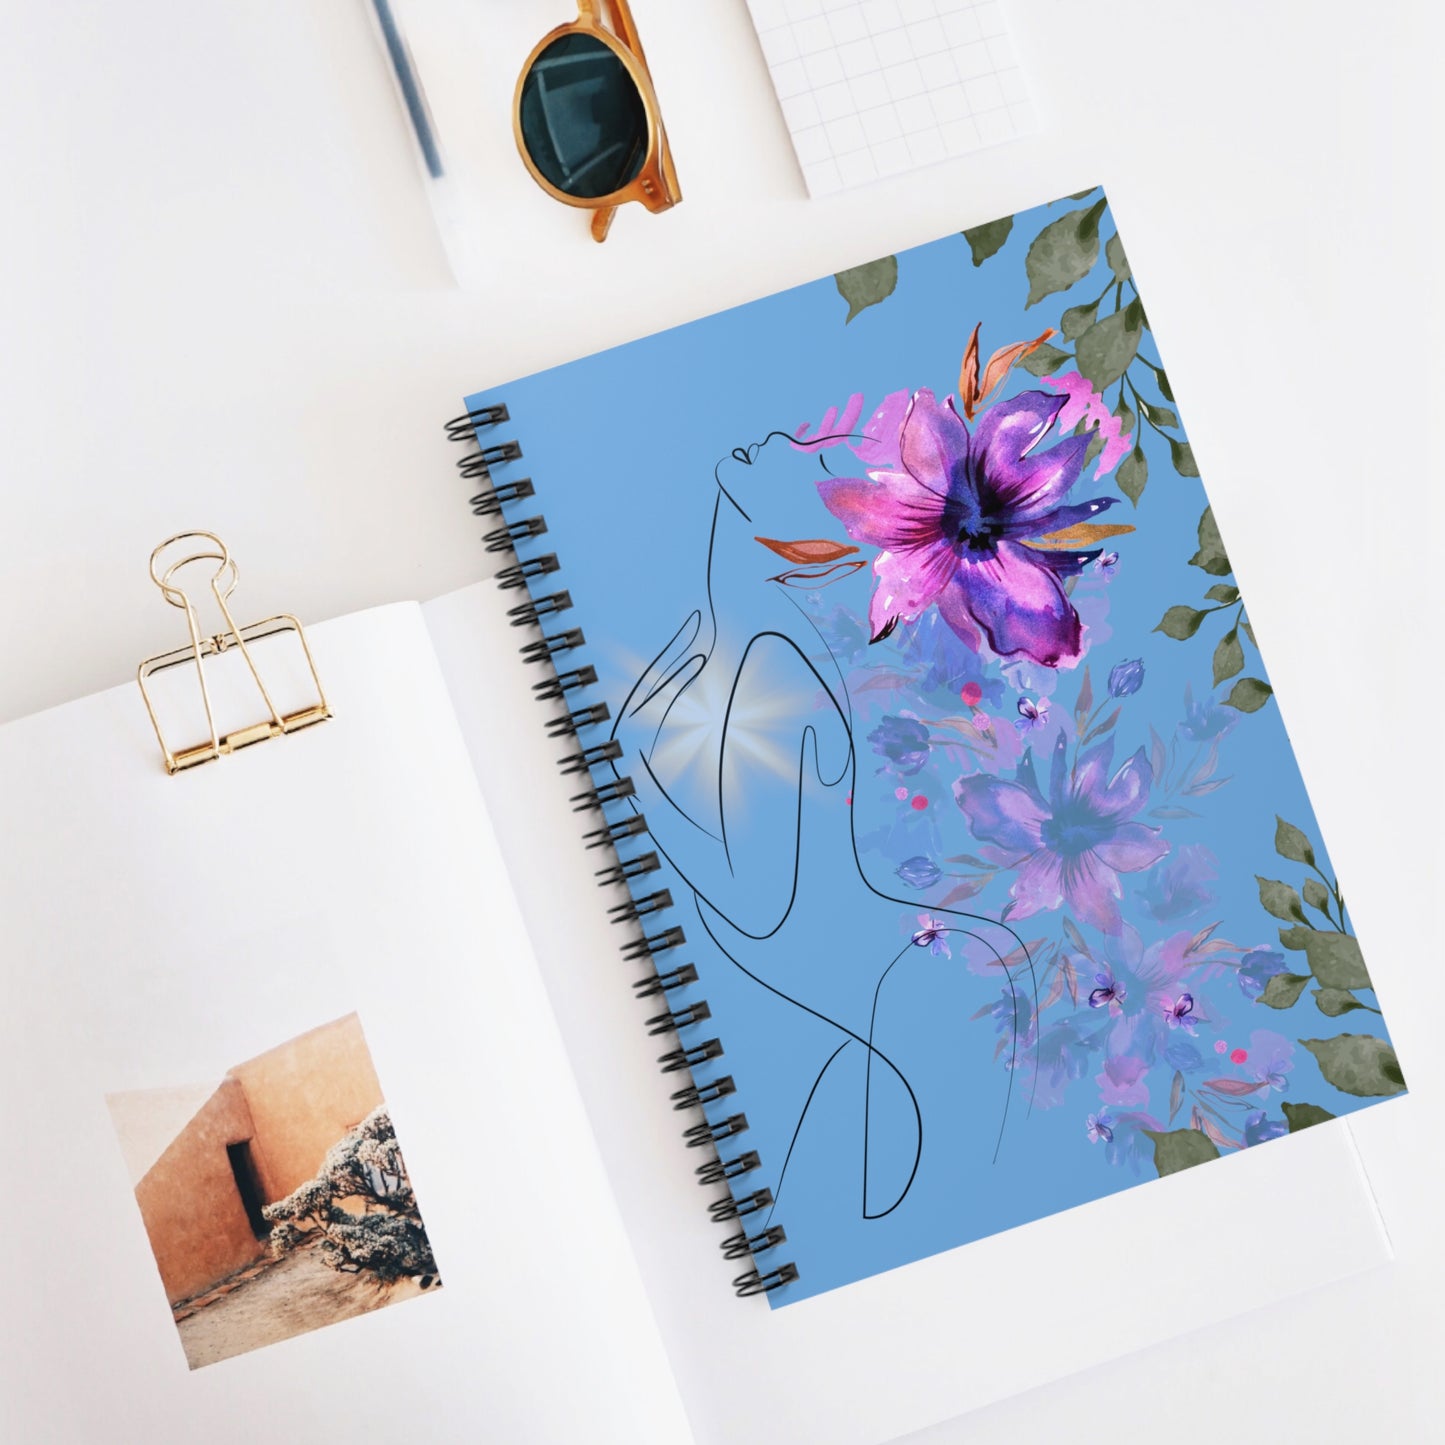 From Within: Spiral Notebook - Log Books - Journals - Diaries - and More Custom Printed by TheGlassyLass